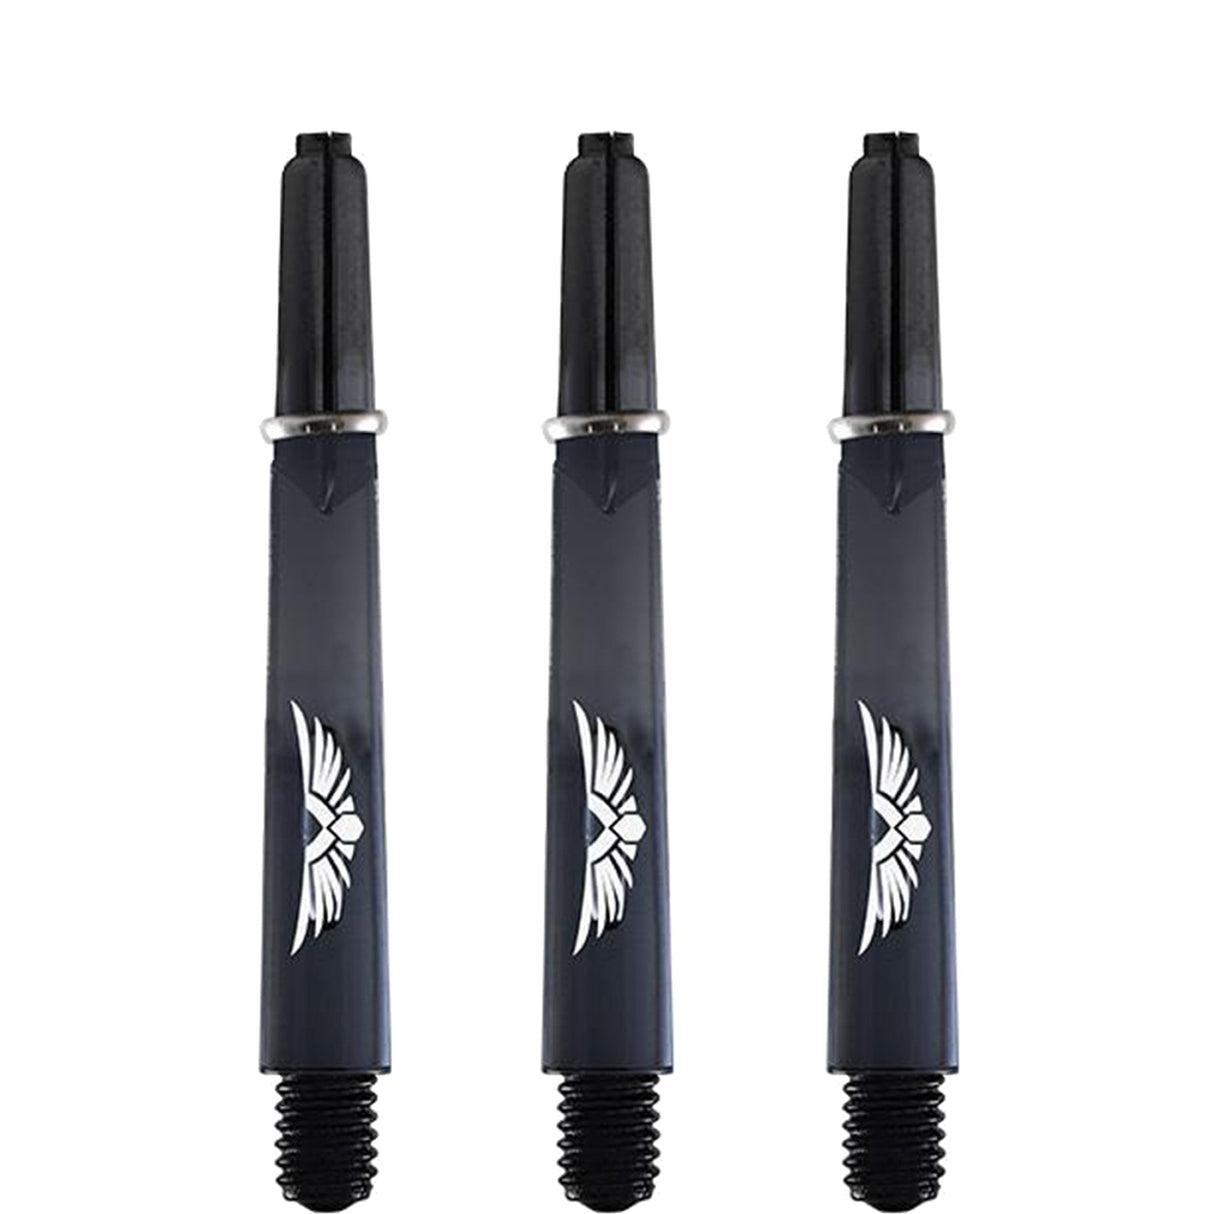 Shot Eagle Claw Dart Shafts - with Machined Rings - Strong Polycarbonate Stems - Clear Black Tweenie